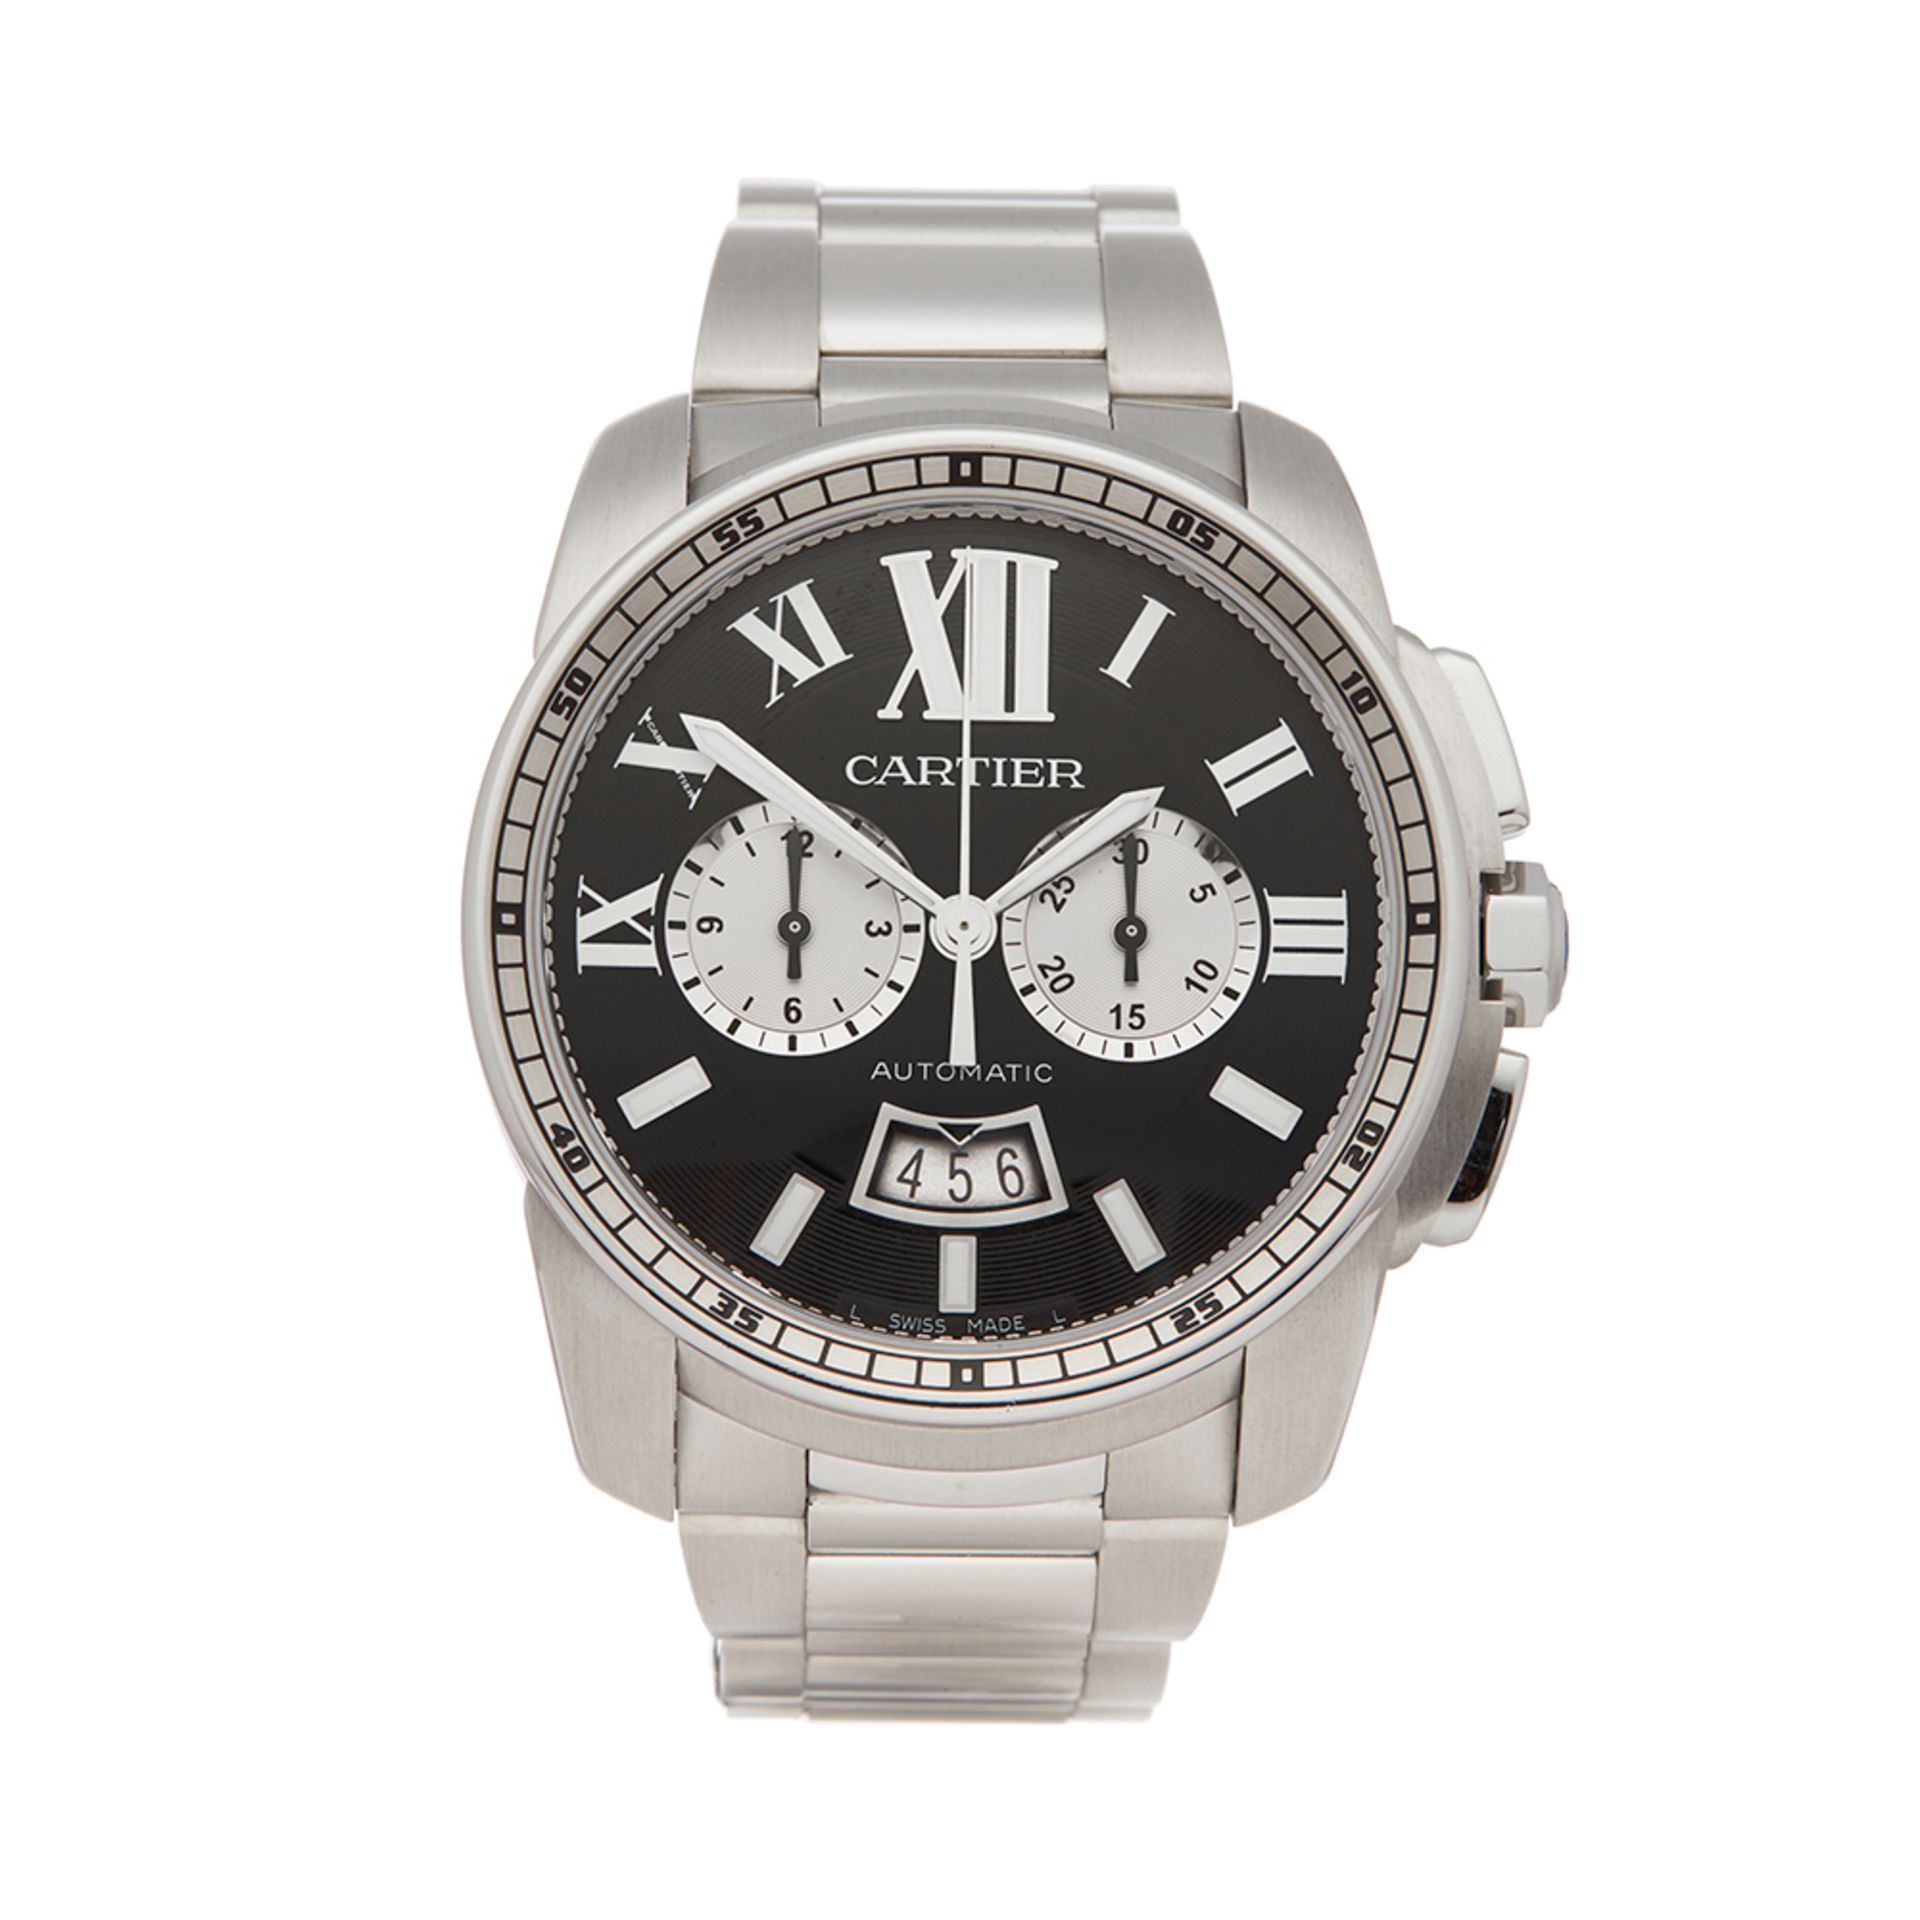 Cartier Calibre W7100061 or 3578 Men Stainless Steel  Watch - Image 8 of 8